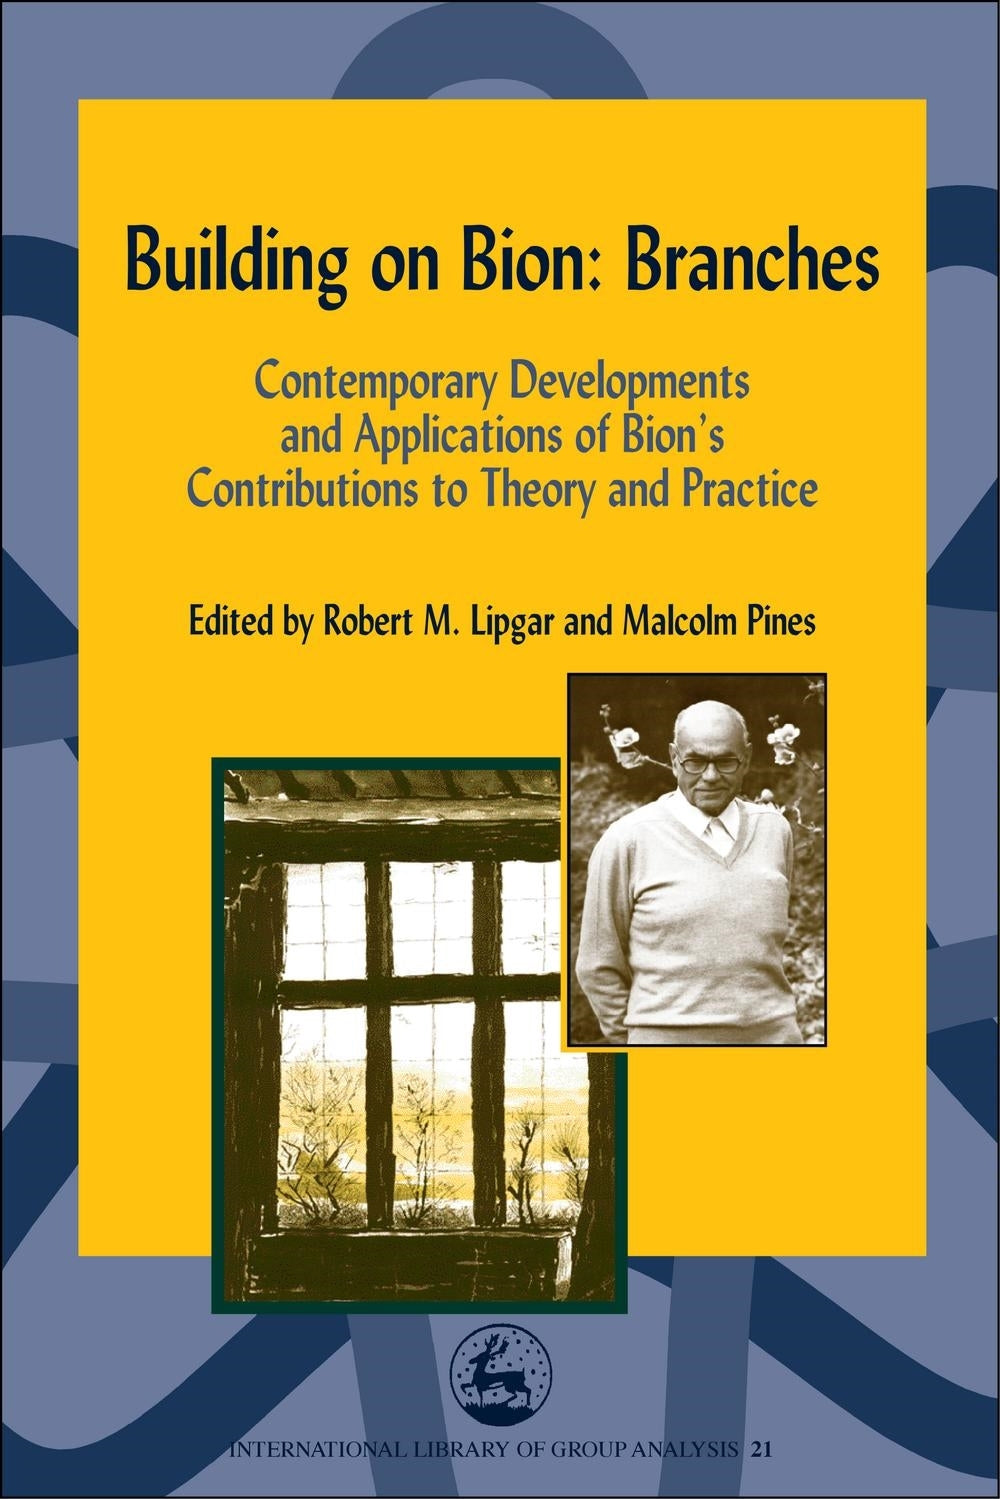 Building on Bion: Roots and Branches by Robert Lipgar, Malcolm Pines